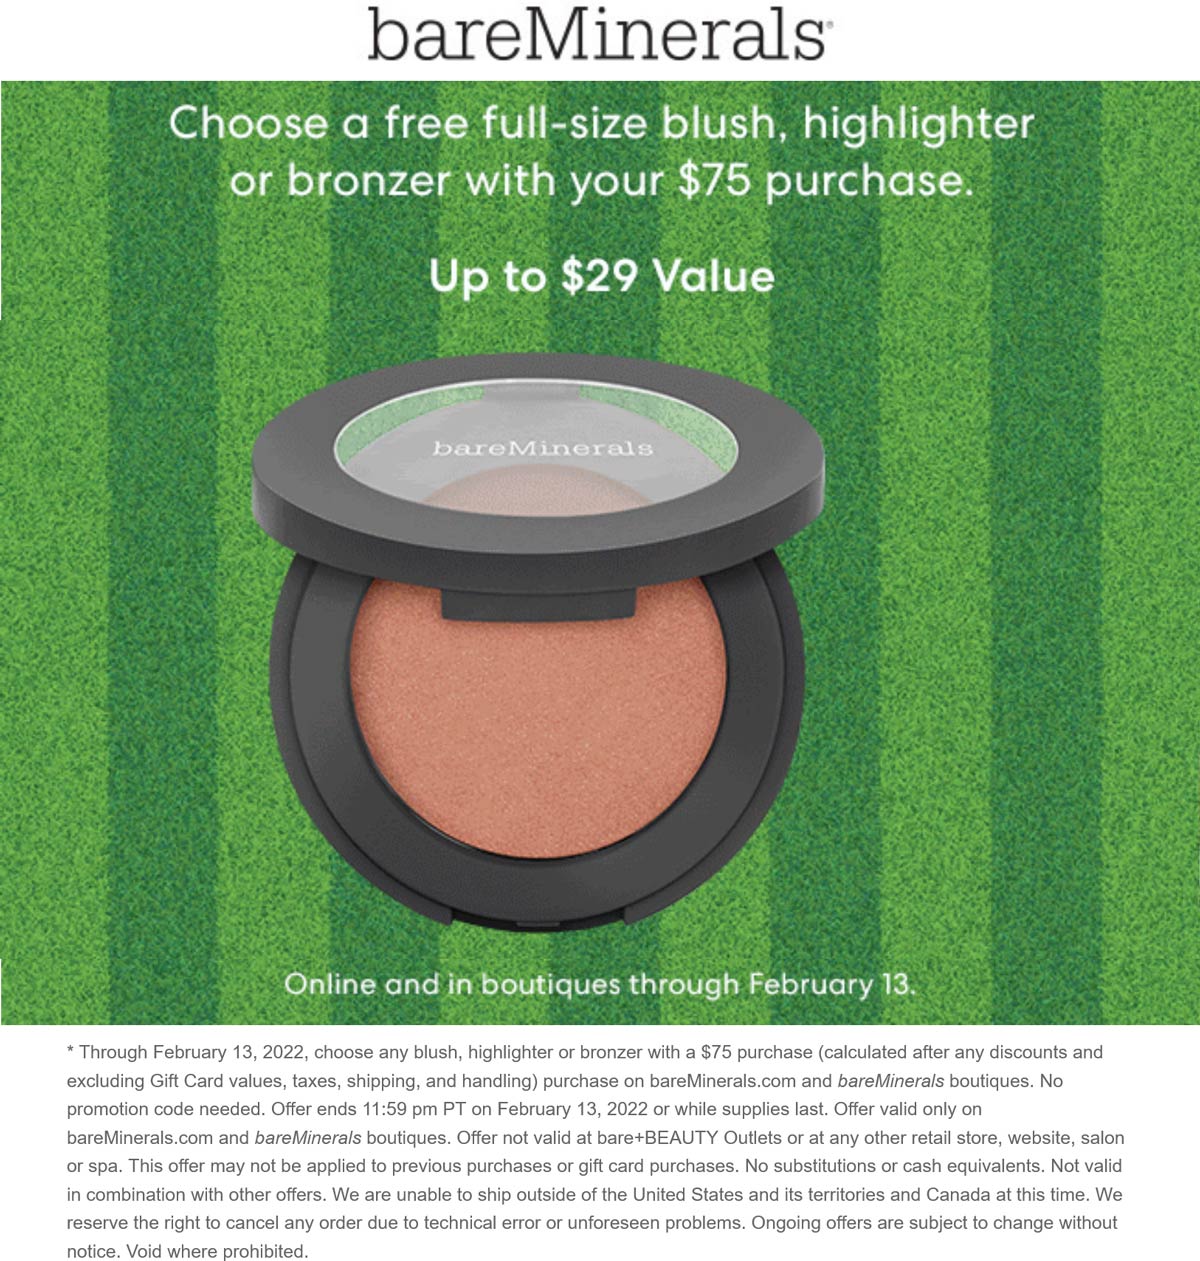 bareMinerals stores Coupon  Free full-size on $75 spent at bareMinerals #bareminerals 